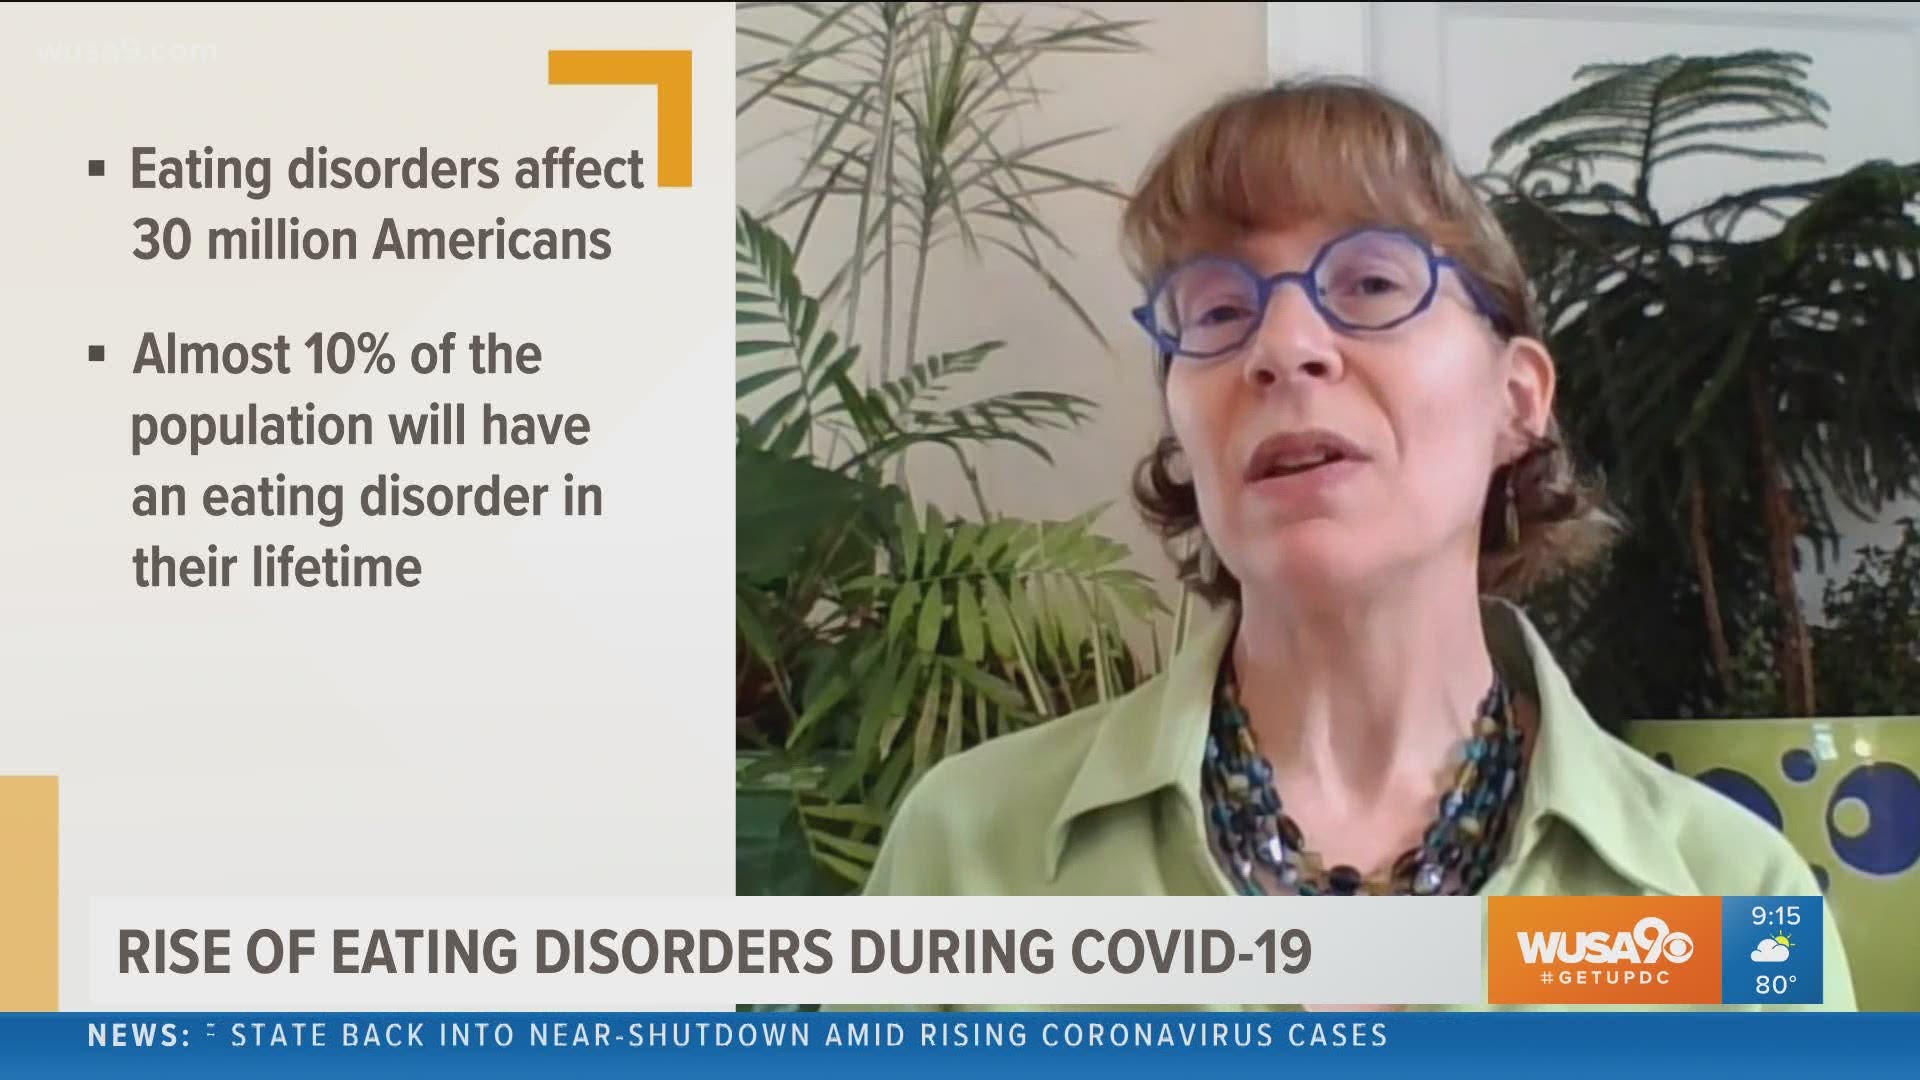 Dr. S. Bryn Austin, the director of STRIPED shares the results of a revealing new study stating that eating disorders are on the rise during COVID-19.